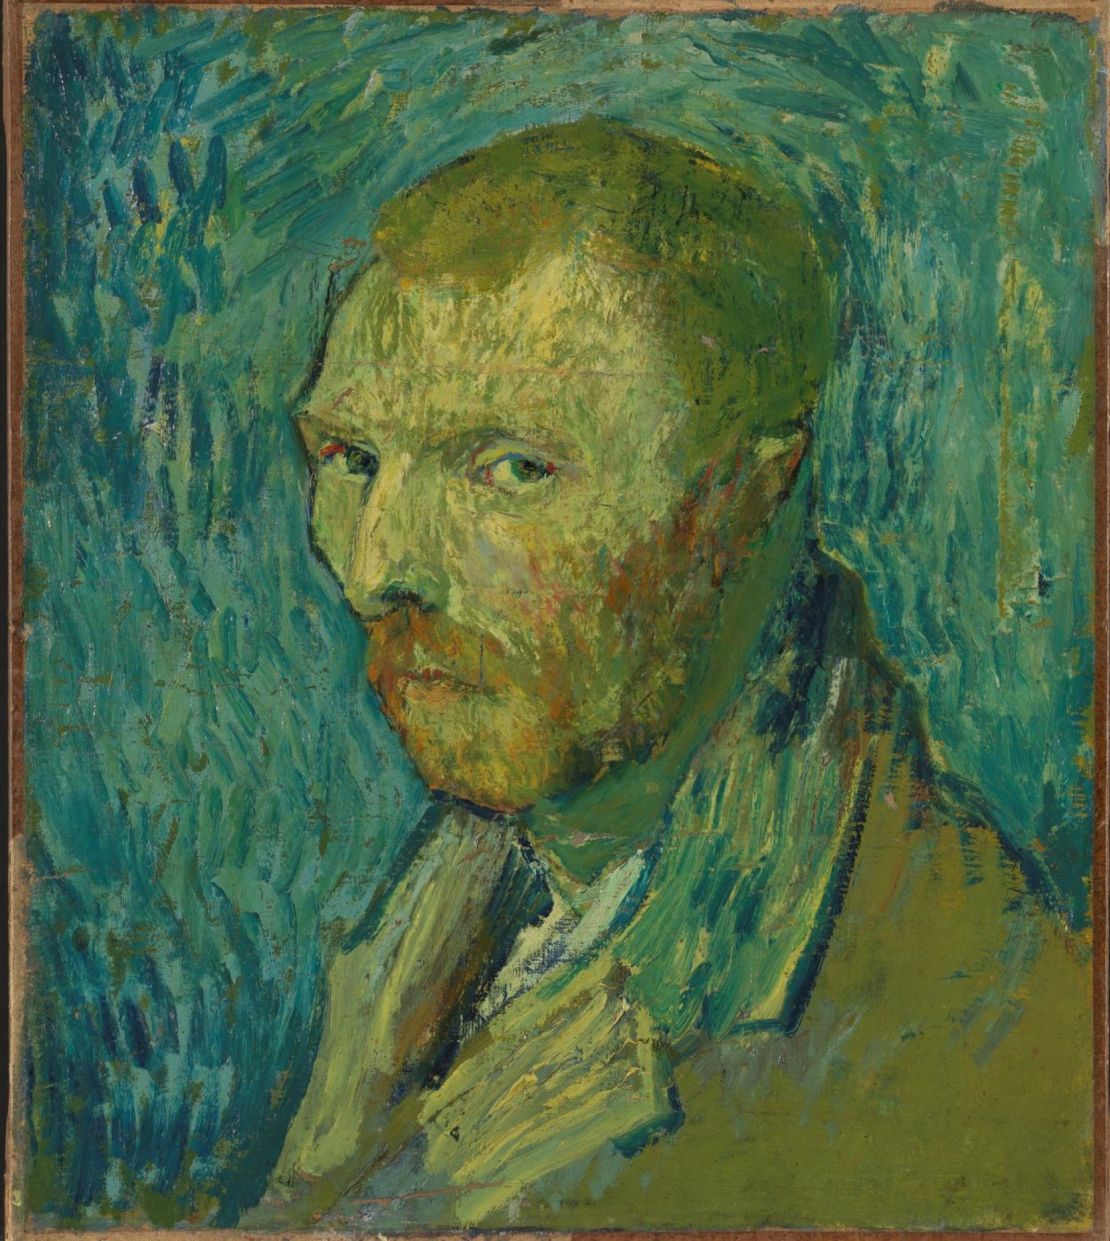 The long-disputed painting was acquired by Norway's National Museum in 1910.